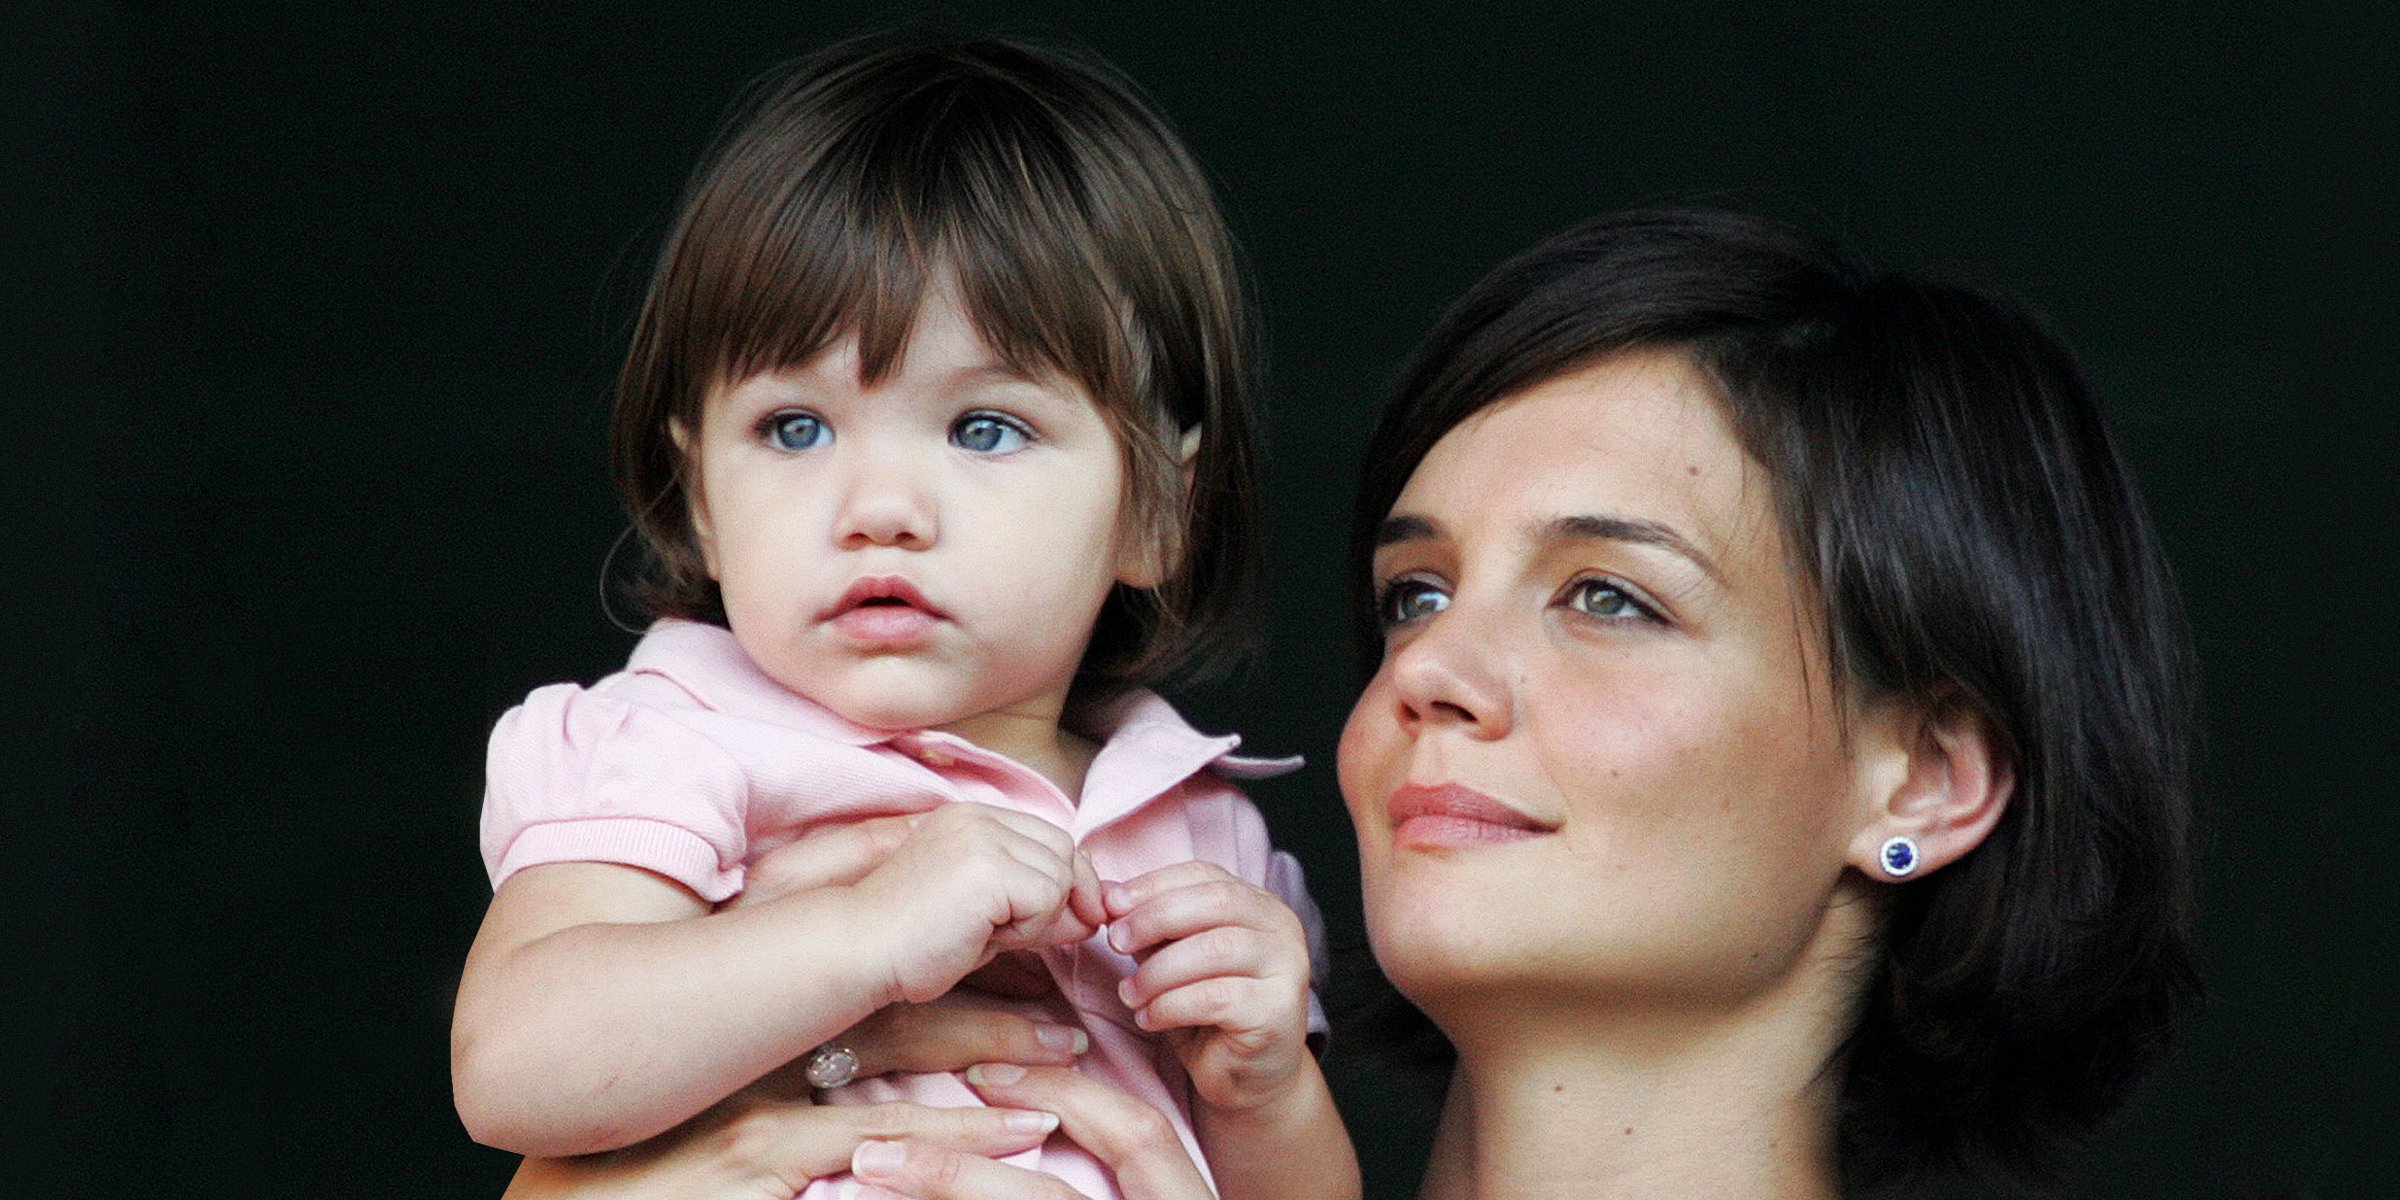 Suri Cruise and Katie Holmes | Source: Getty Images